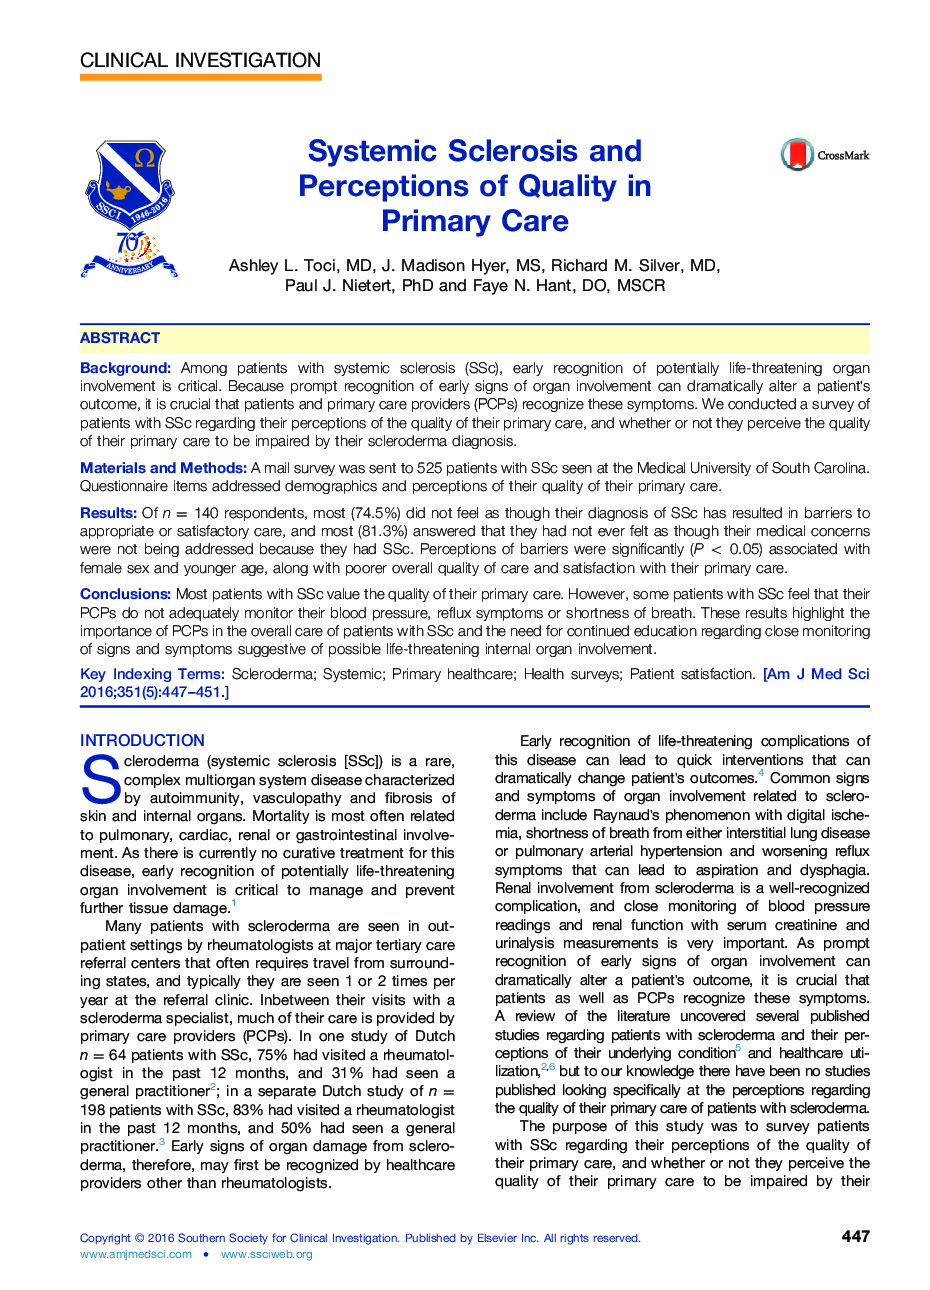 Systemic Sclerosis and Perceptions of Quality in Primary Care 